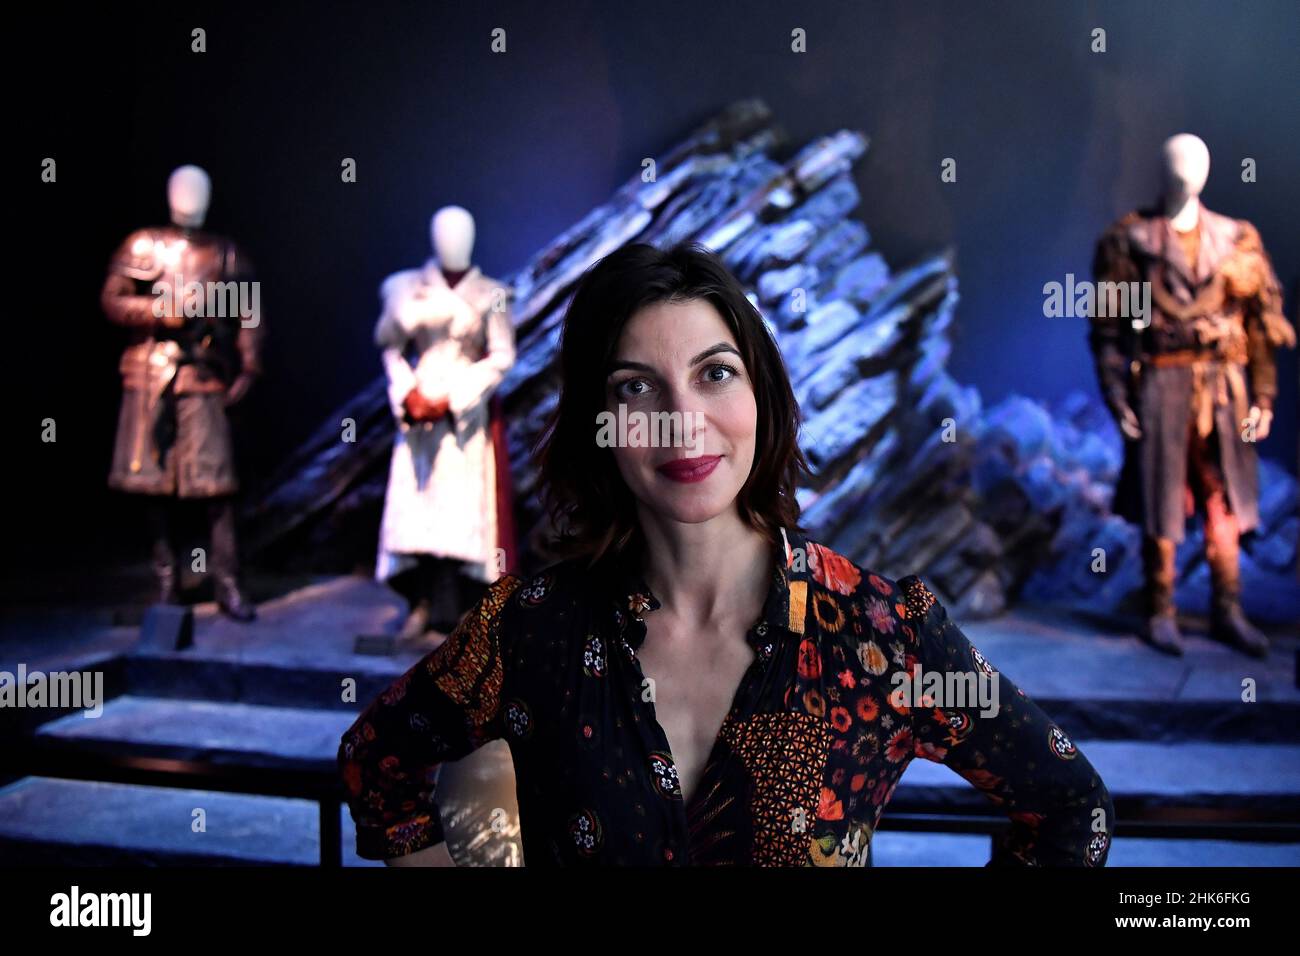 Actor Natalia Tena who plays Osha from the TV show Game of Thrones poses  for a photograph in the Dragonstone Throne room during the media preview  day for the opening of the